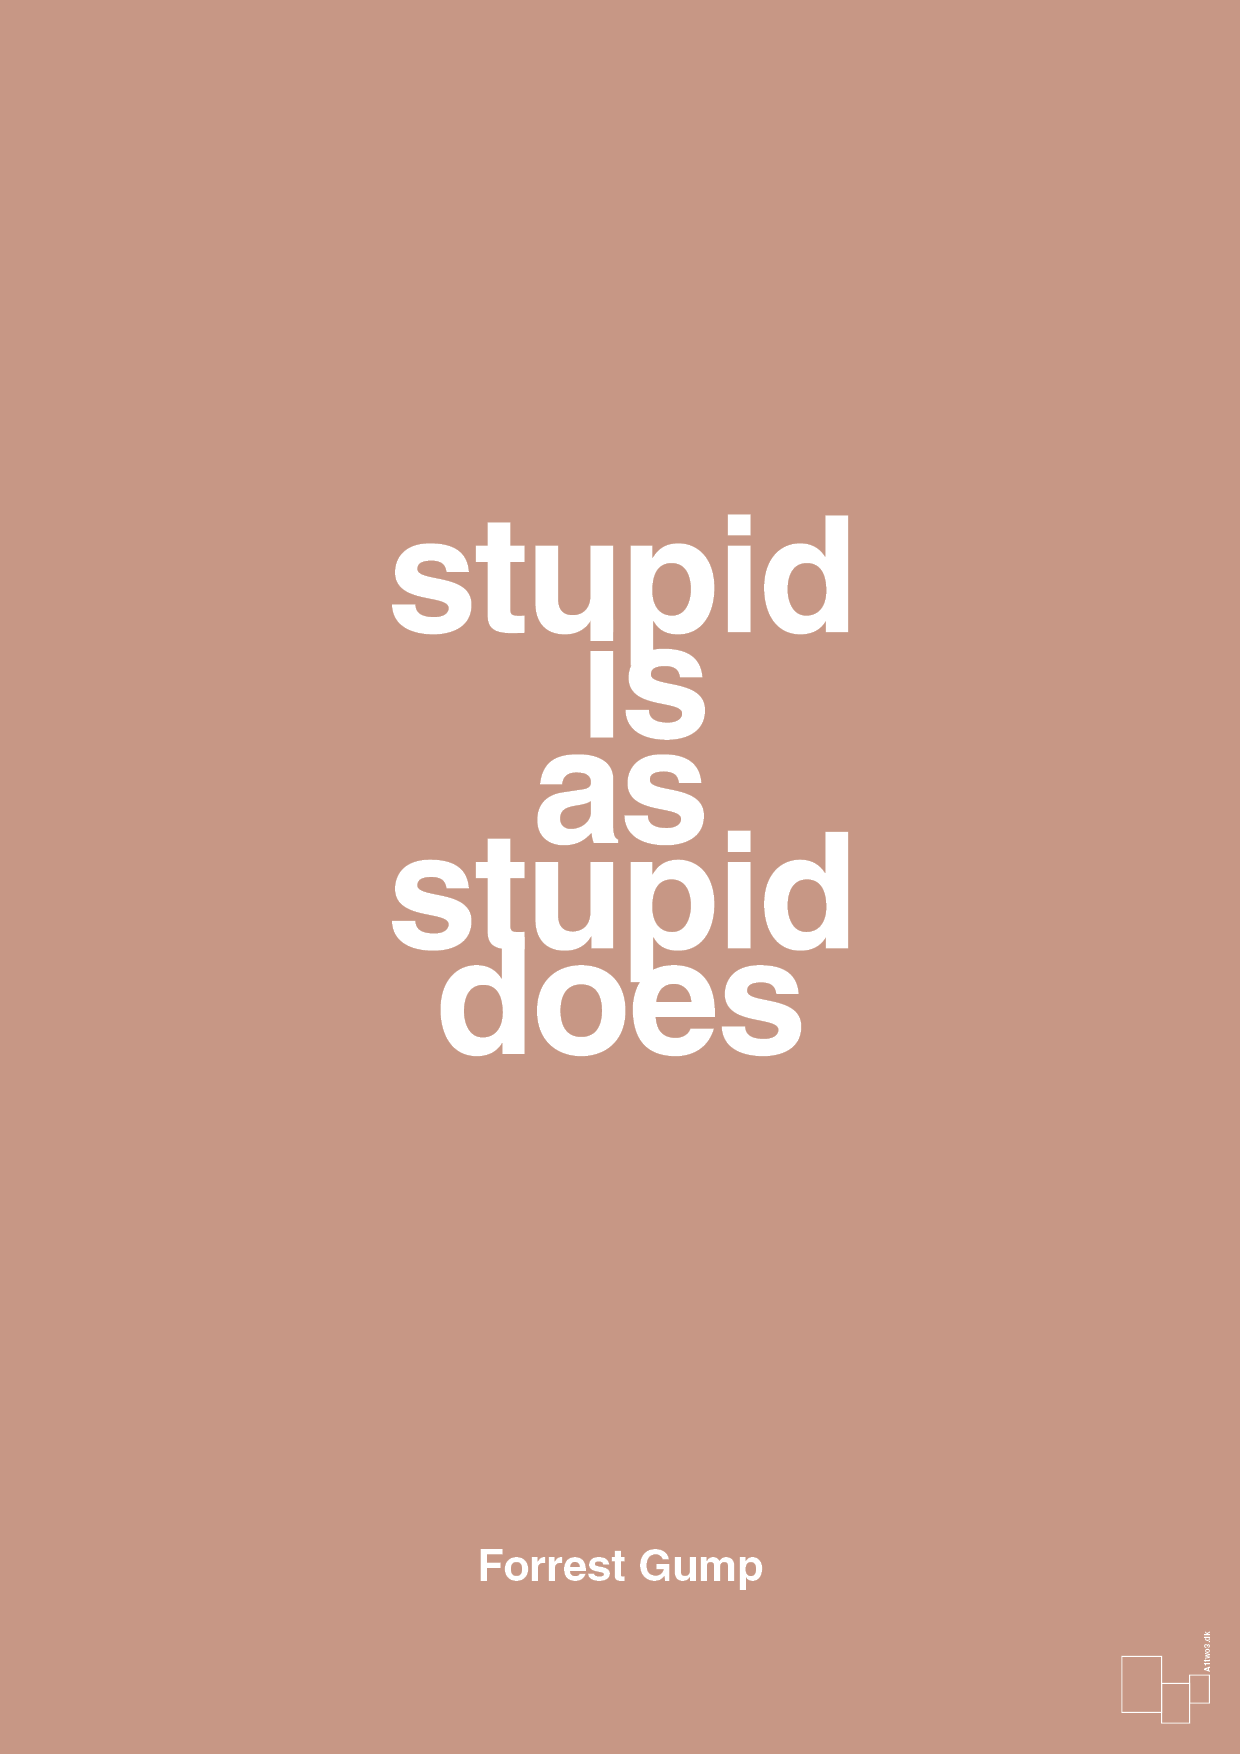 stupid is as stupid does - Plakat med Citater i Powder